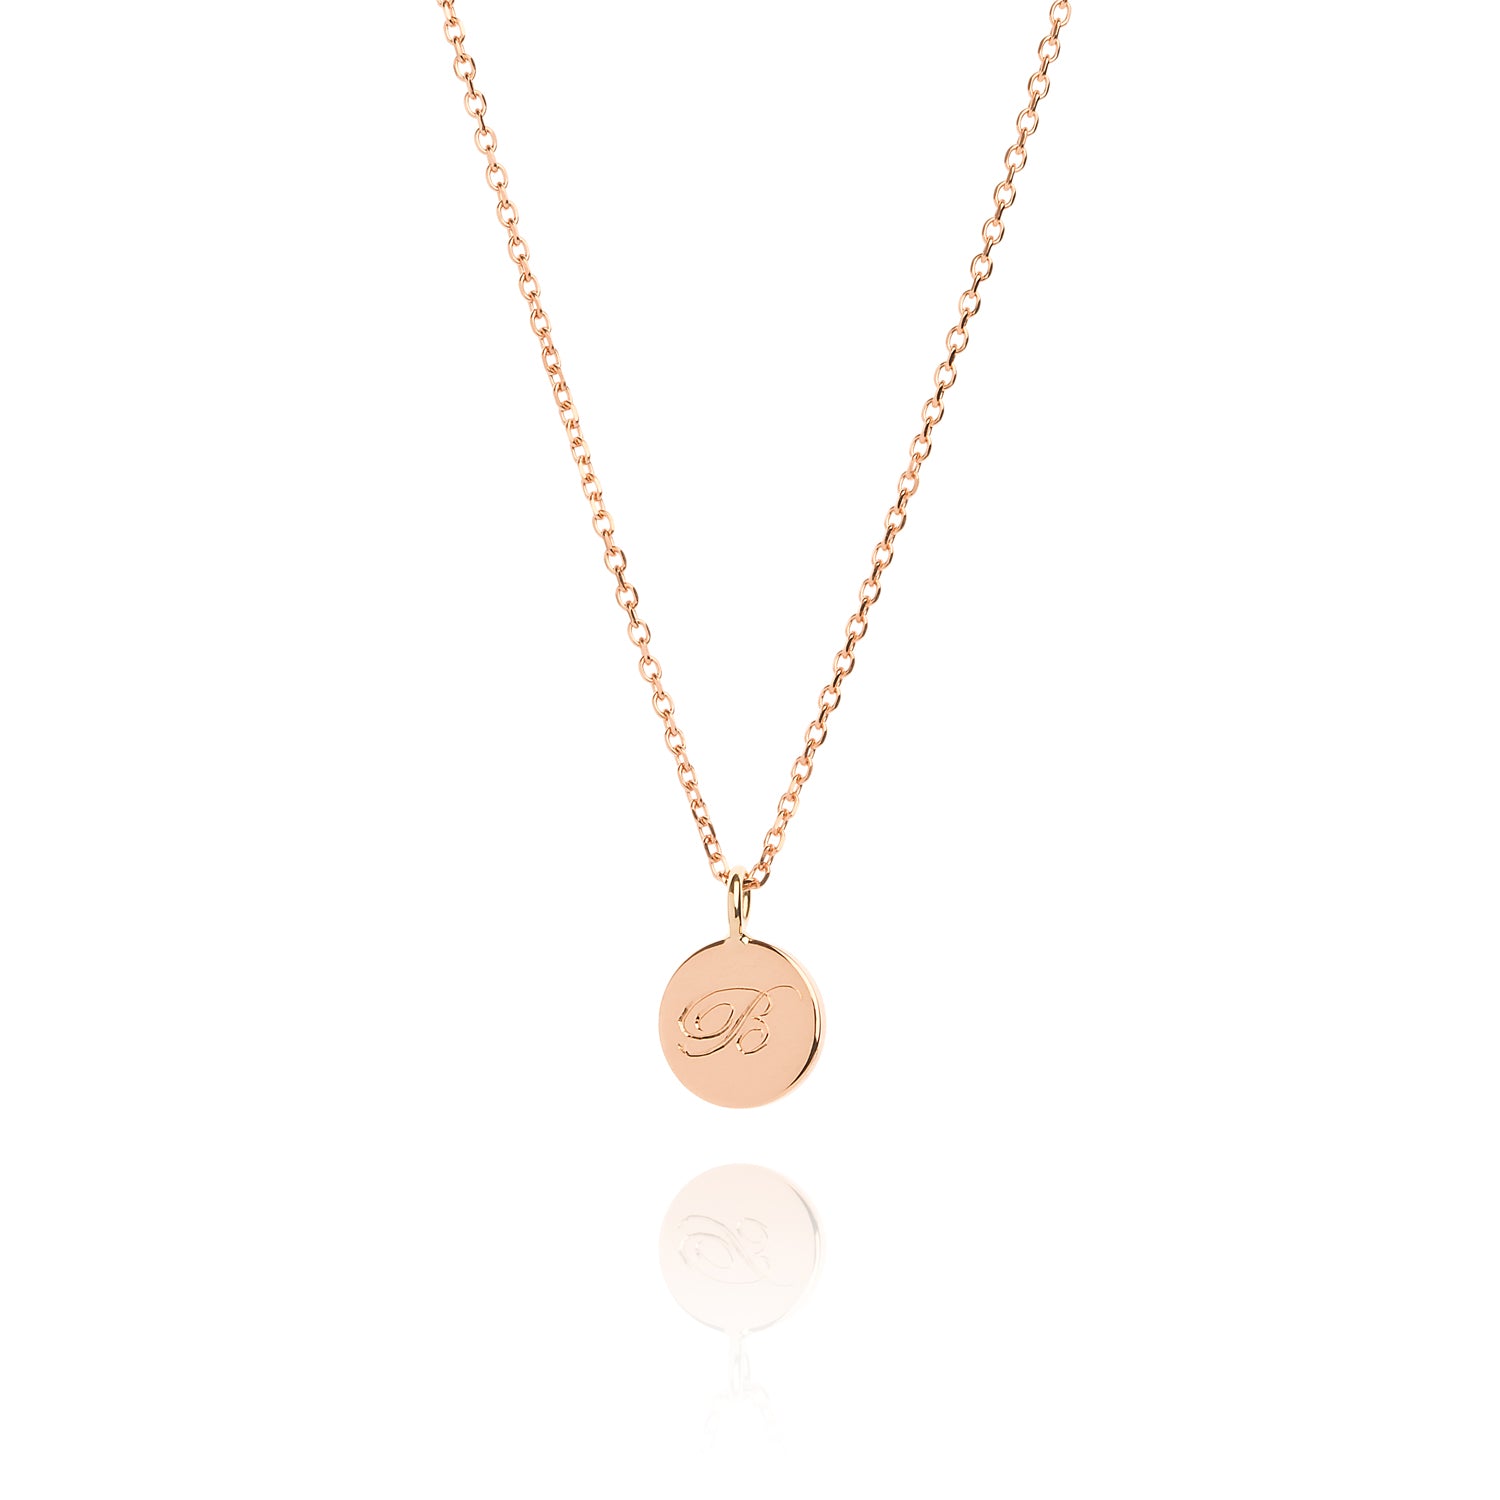 Laura Lee 9ct rose gold disc necklace with engraved script initial.